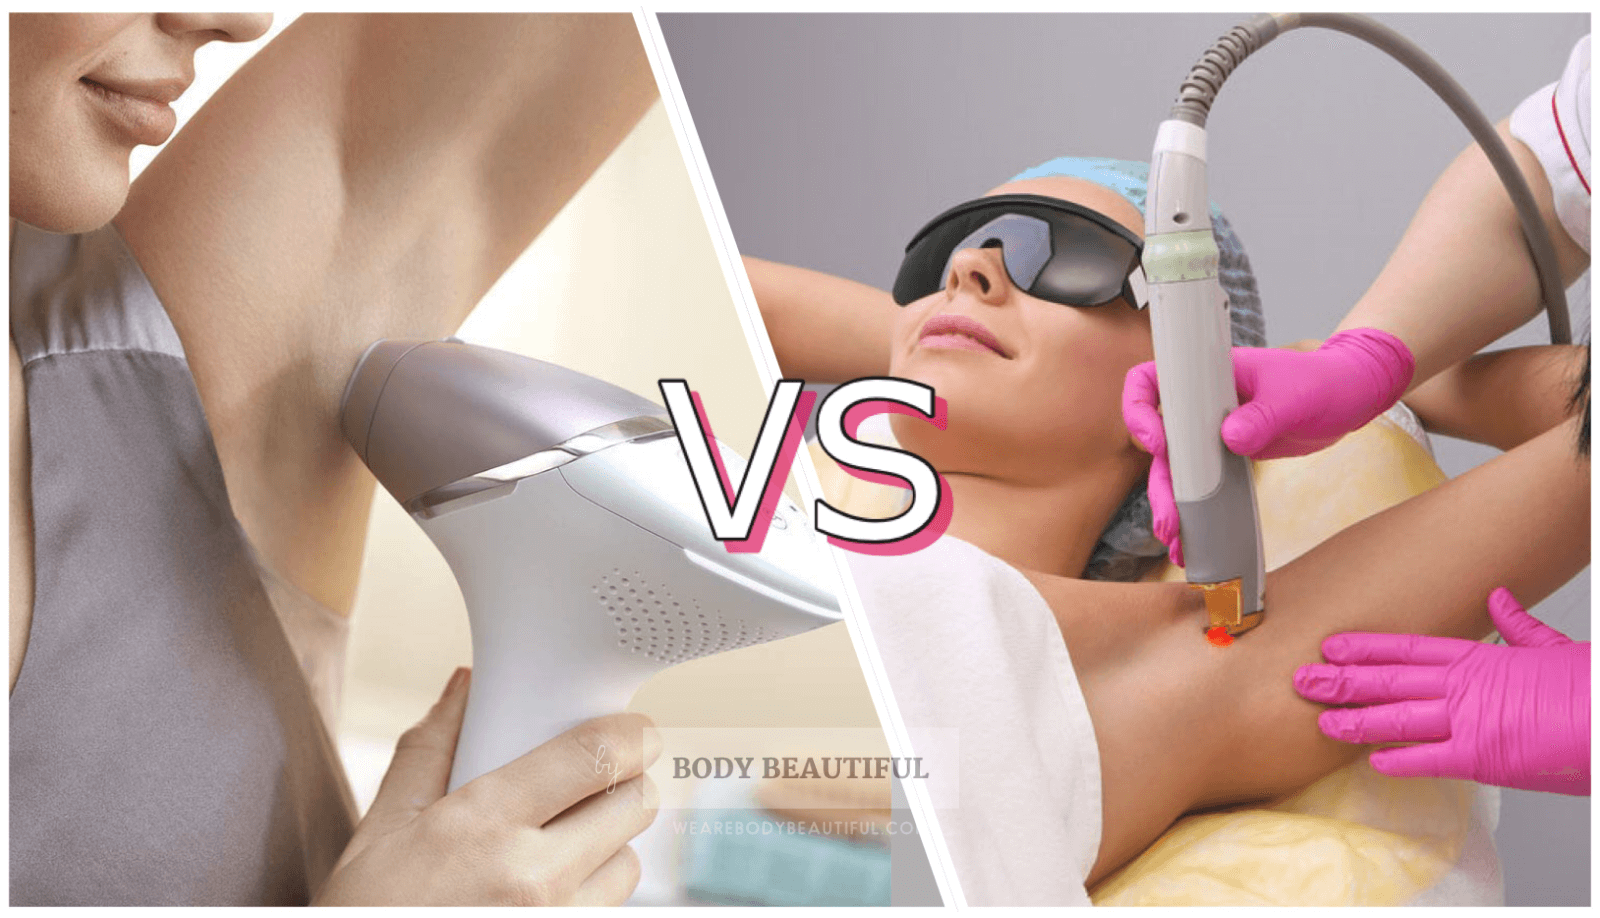 Laser hair removal at home vs professional treatments